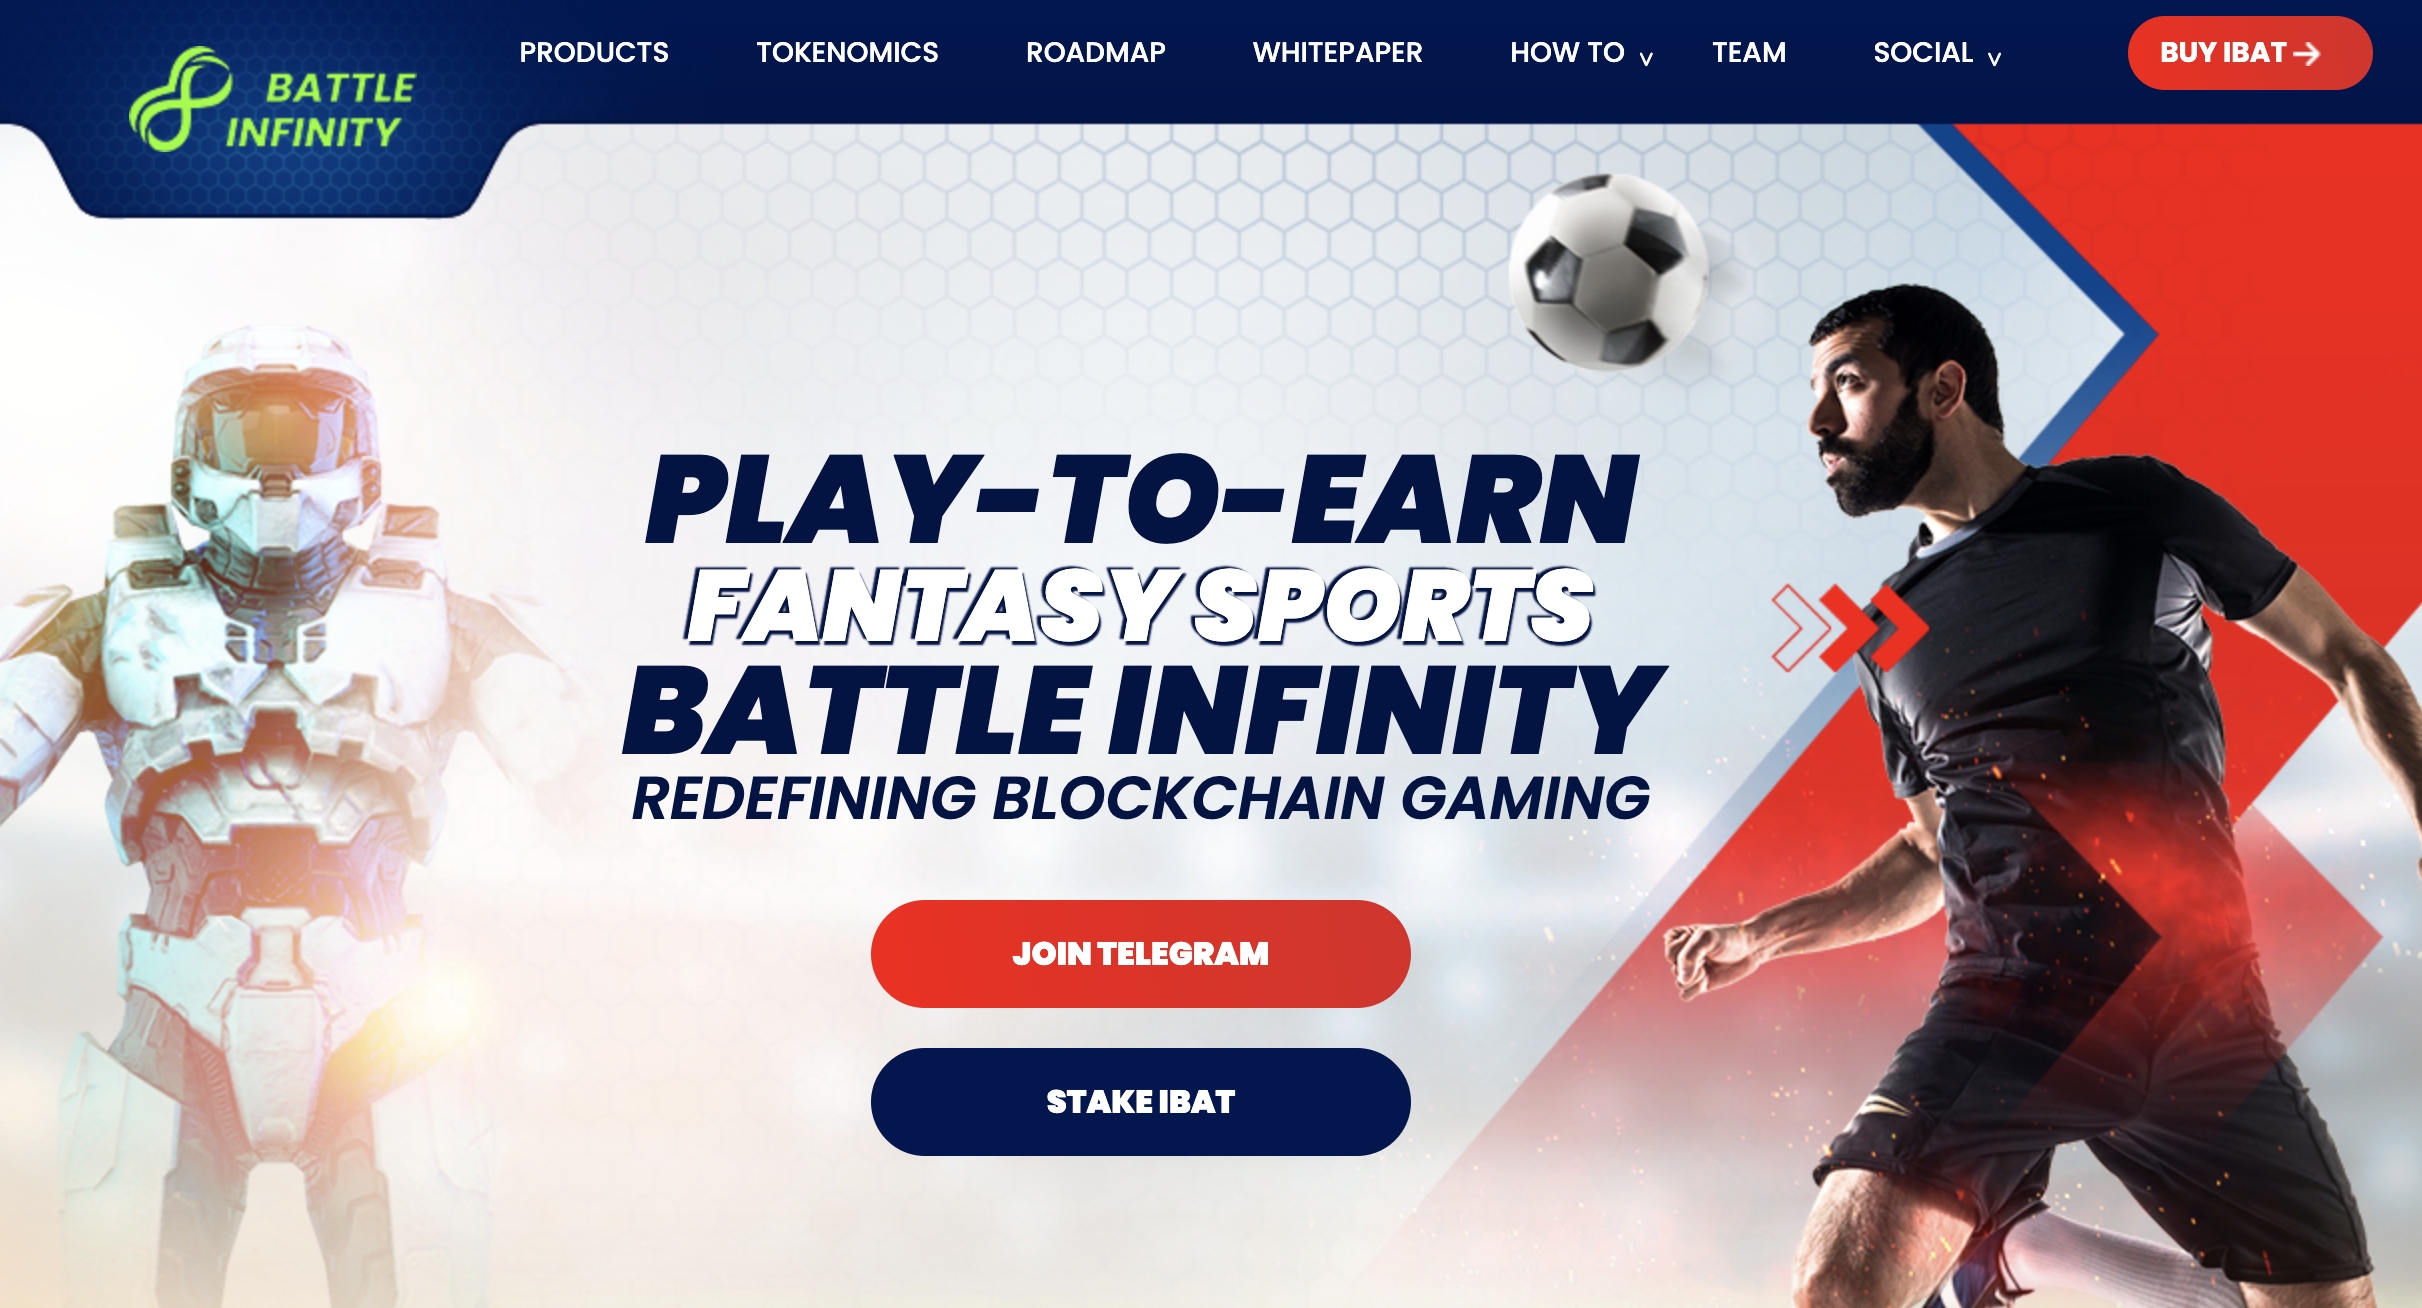 Battle Infinity play-to-earn home page